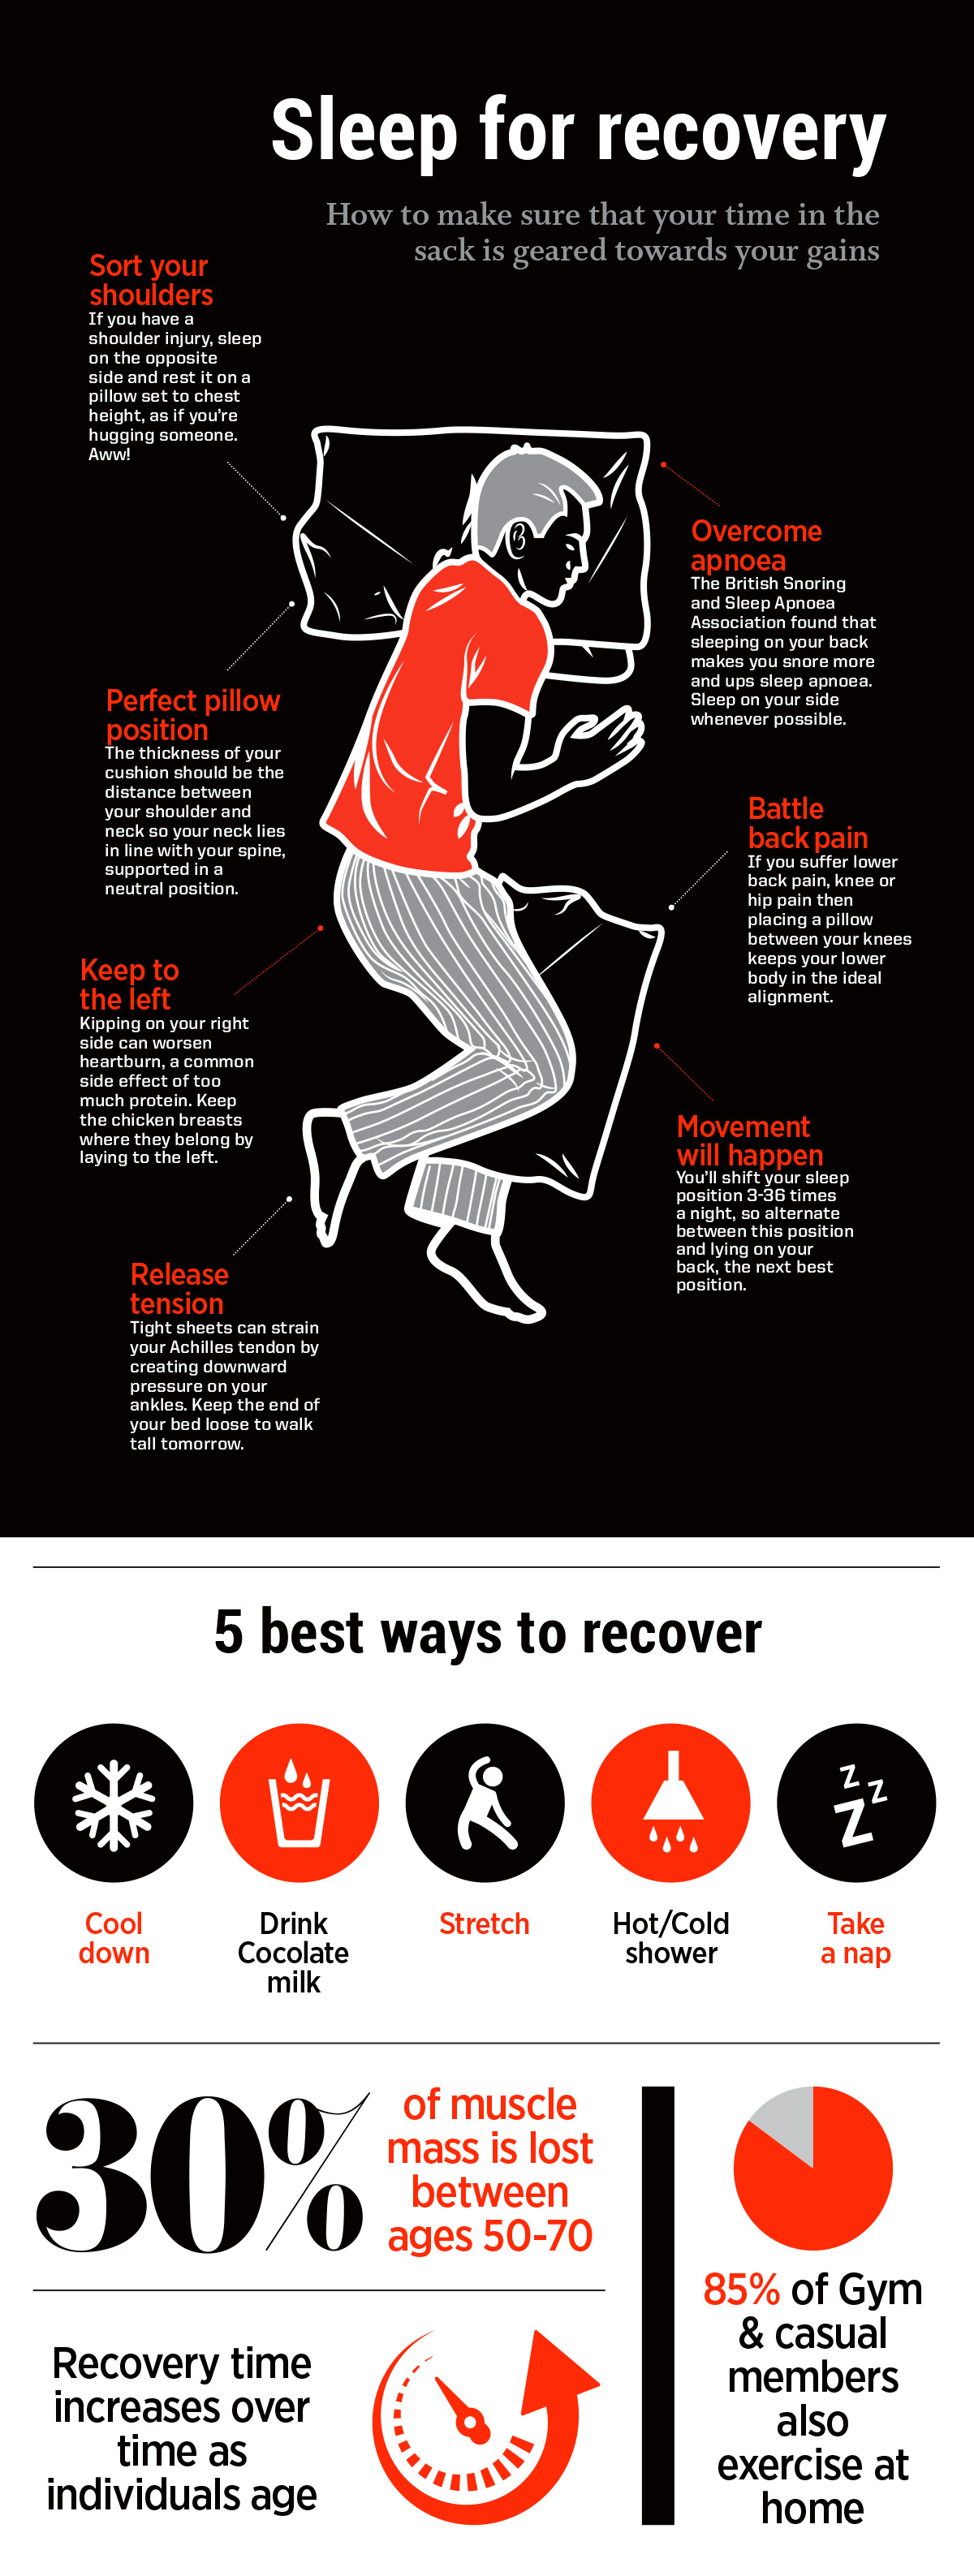 https://www.trainmag.com/wp-content/uploads/2017/06/sleep-recovery-infographic.jpg